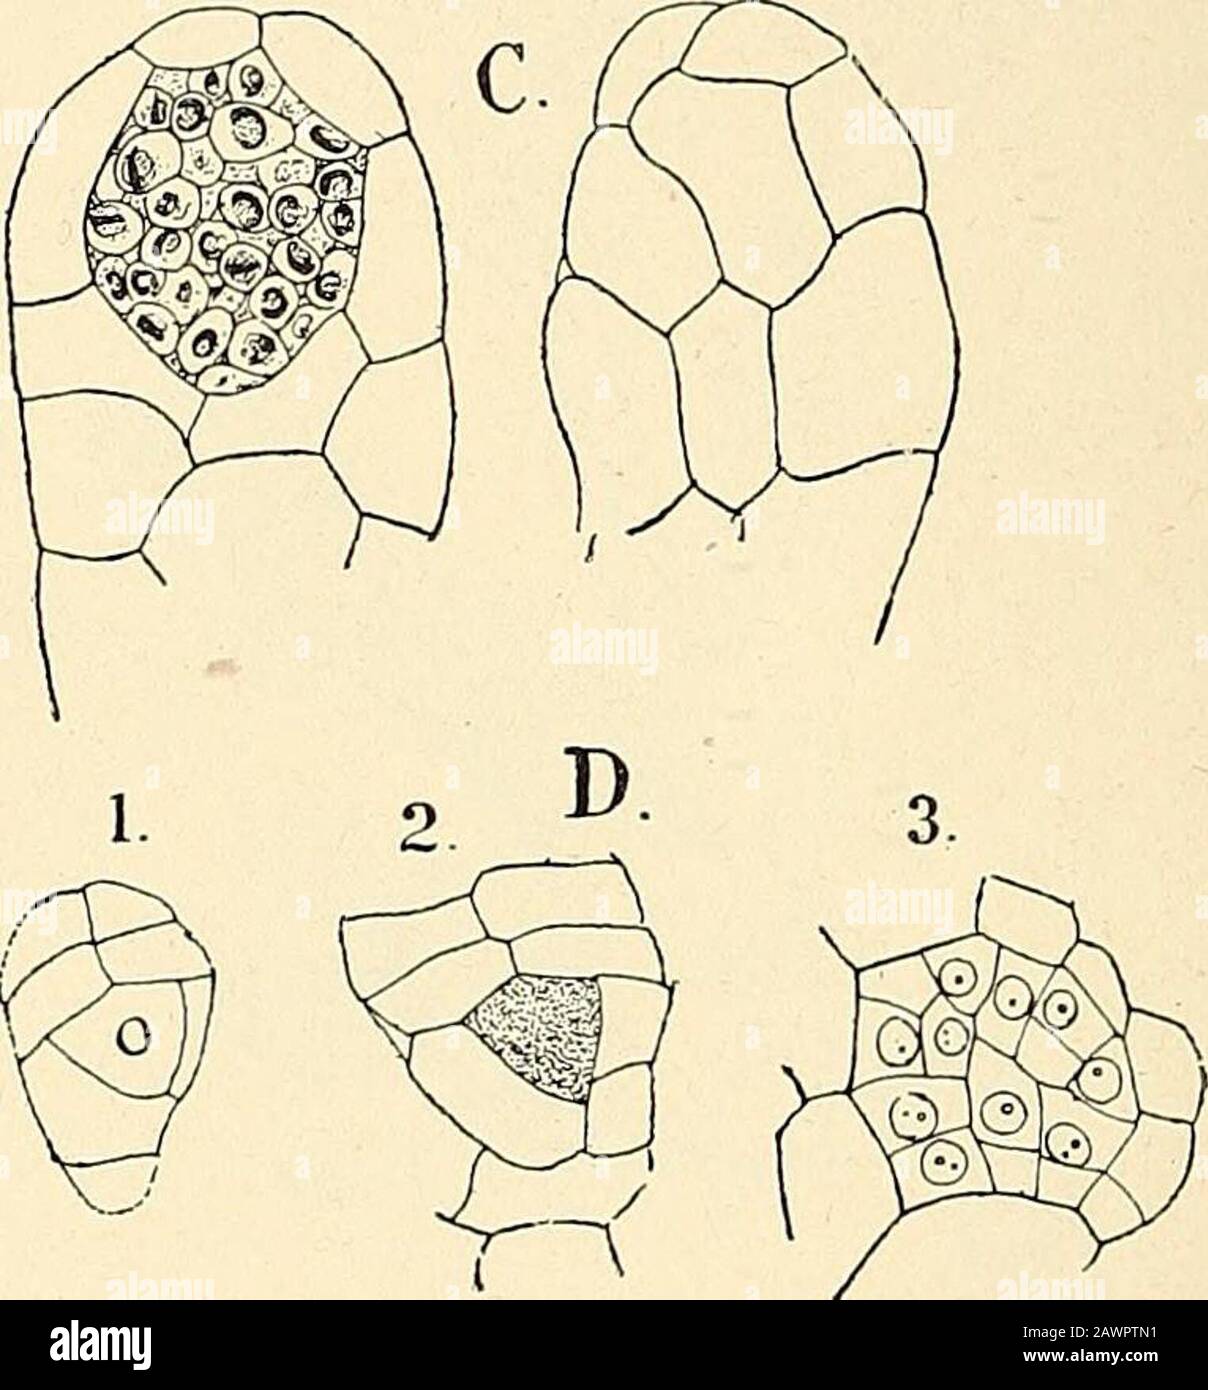 The structure & development of the mosses and ferns (Archegoniatae) . Fig. 221.—Development of the autheridium, X 190. A, Longitudinal section through the antheridia!meristem showing antheridia of different ages ; B, longitudinal section of young antheridium,X375 ; C, two sections of a terminal, single antheridium, nearly ripe, X190 ; D, threetransverse sections of young antheridium, X 190 ; 0, opercular cell. eusporangiate Ferns, the antheridium mother cell is dividedinto an inner and an outer cell, of which the inner one forms atonce the sperm cells. When the antheridium arises at the endof Stock Photo